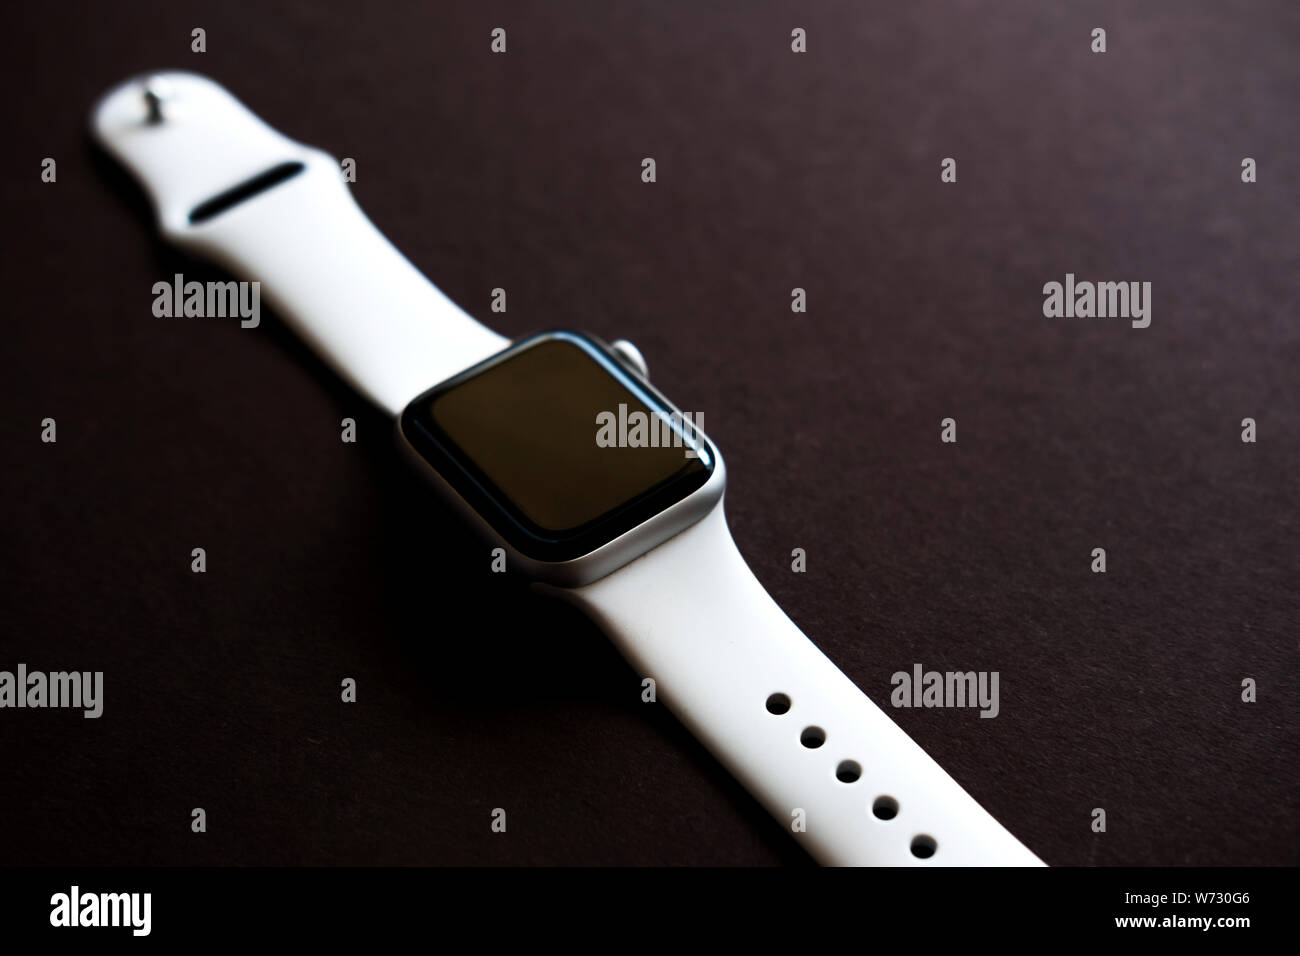 Chekhov, Russia - July 19, 2019: Apple Watch Series 4 white color. A new watch from an Apple company closeup isolated on dark background Stock Photo